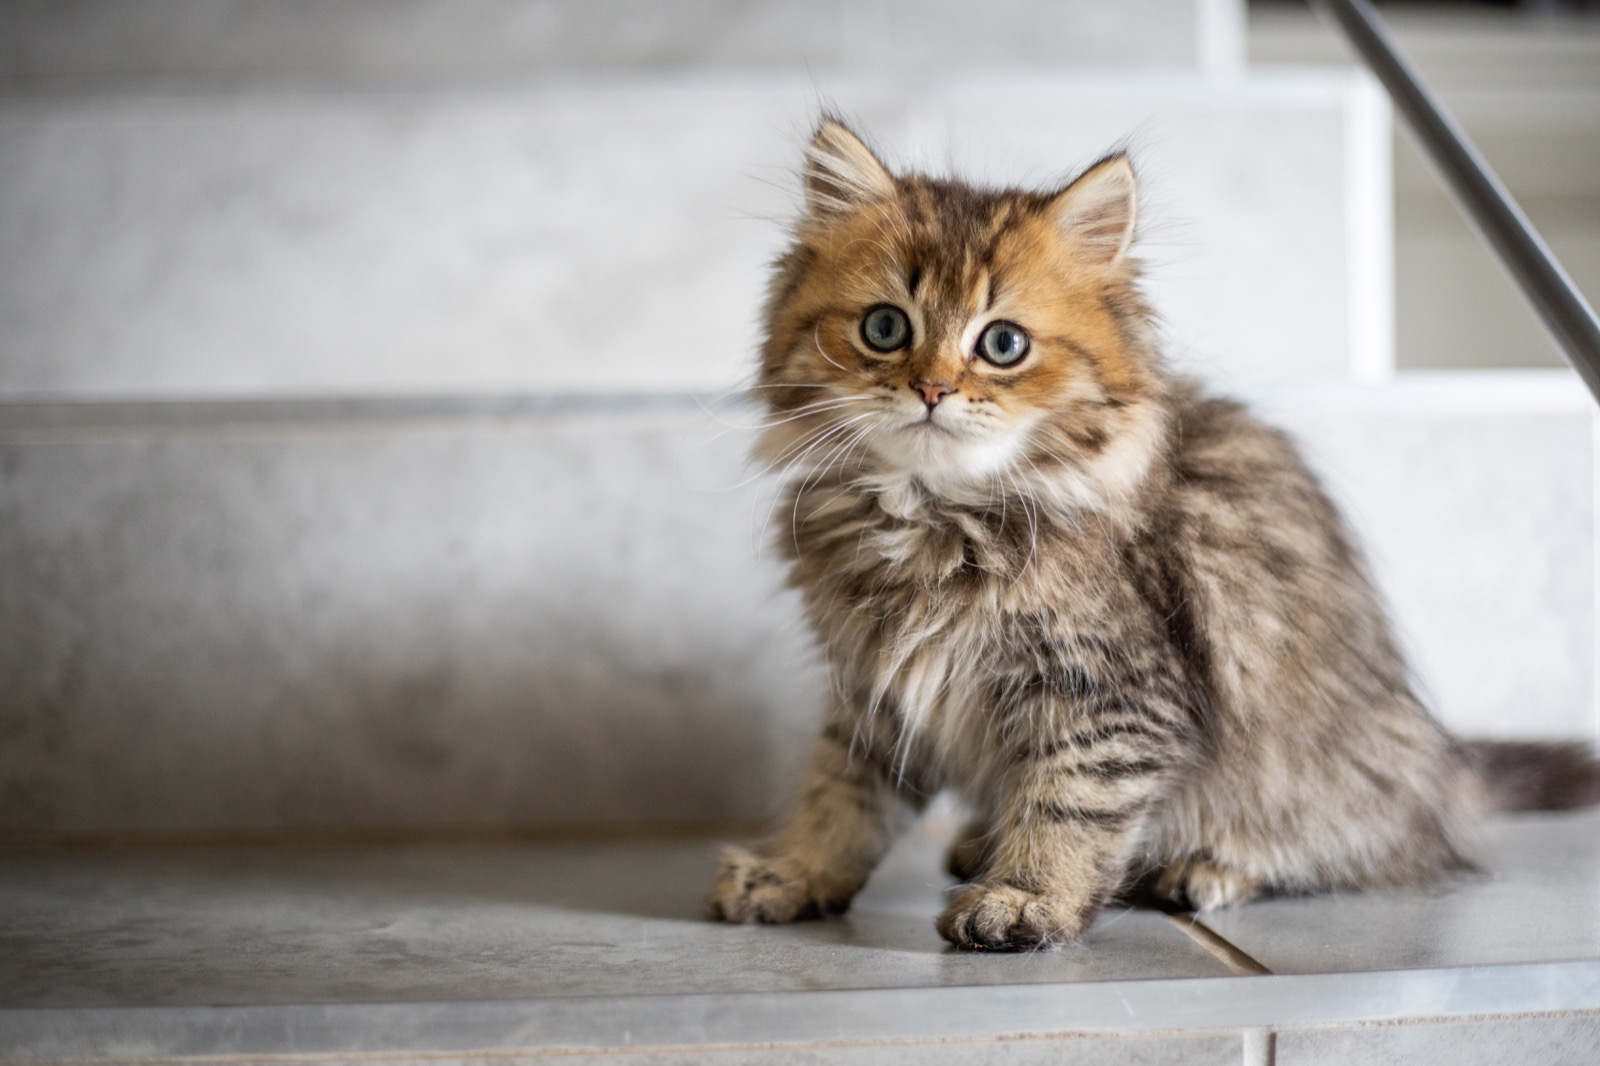 Can You Pass This General Knowledge Quiz While Being Distracted by Adorable Kittens? Cute cat kitten 2